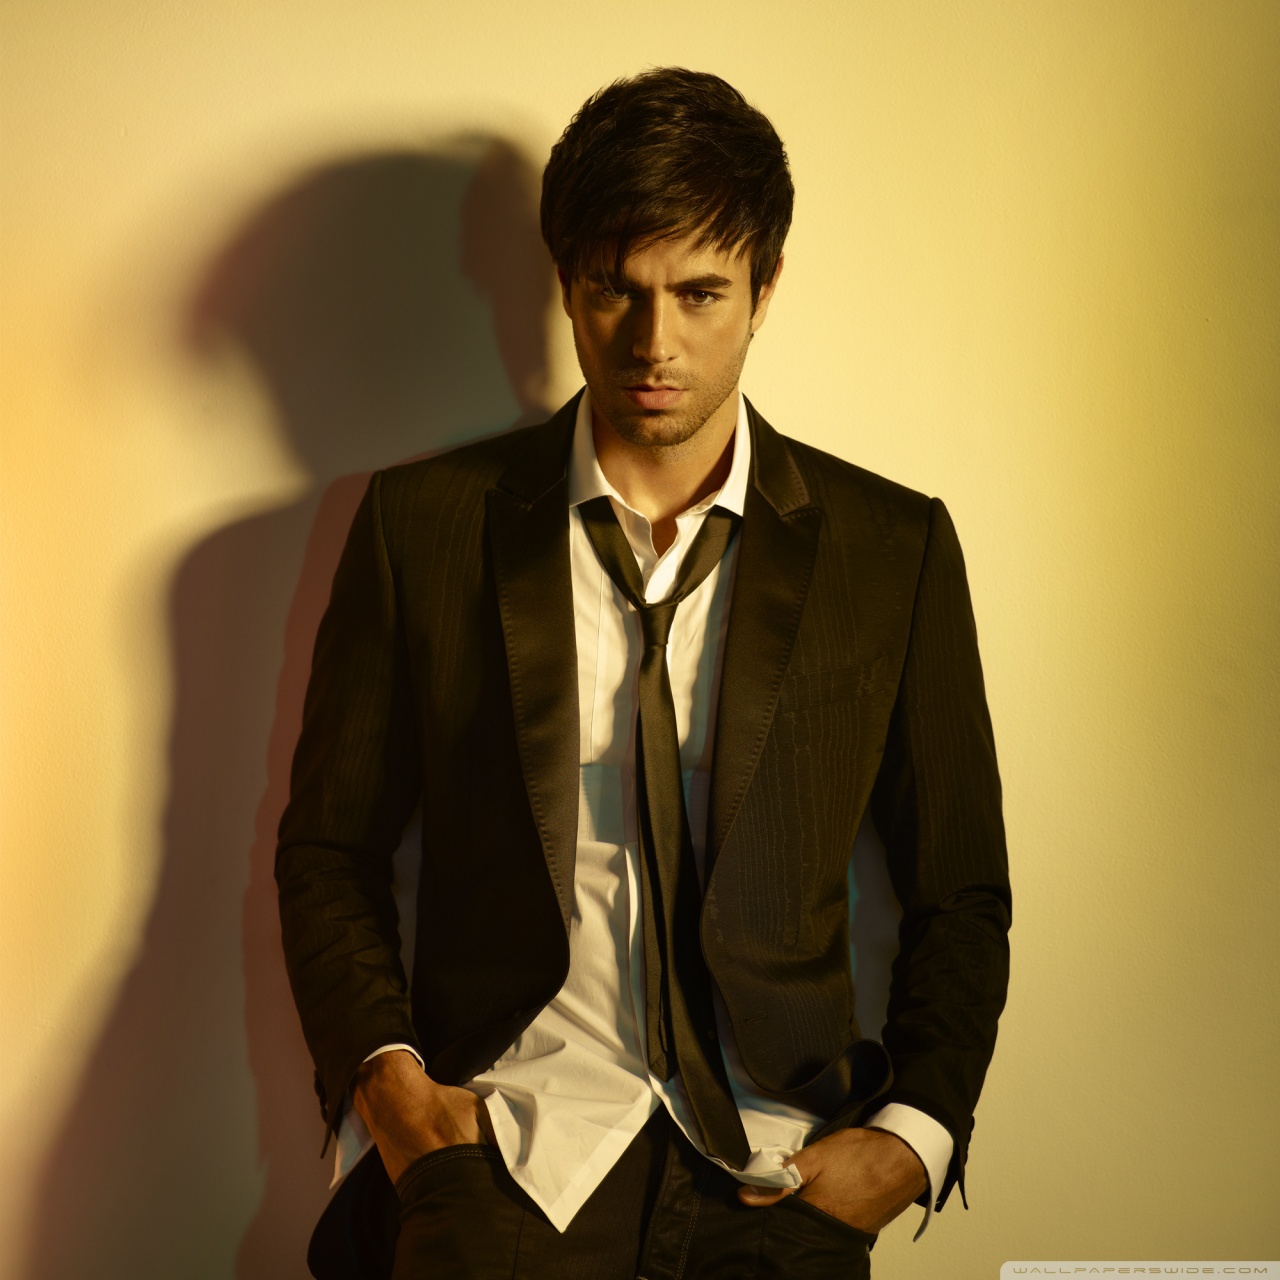 Ipad - Enrique Iglesias And Tinashe , HD Wallpaper & Backgrounds